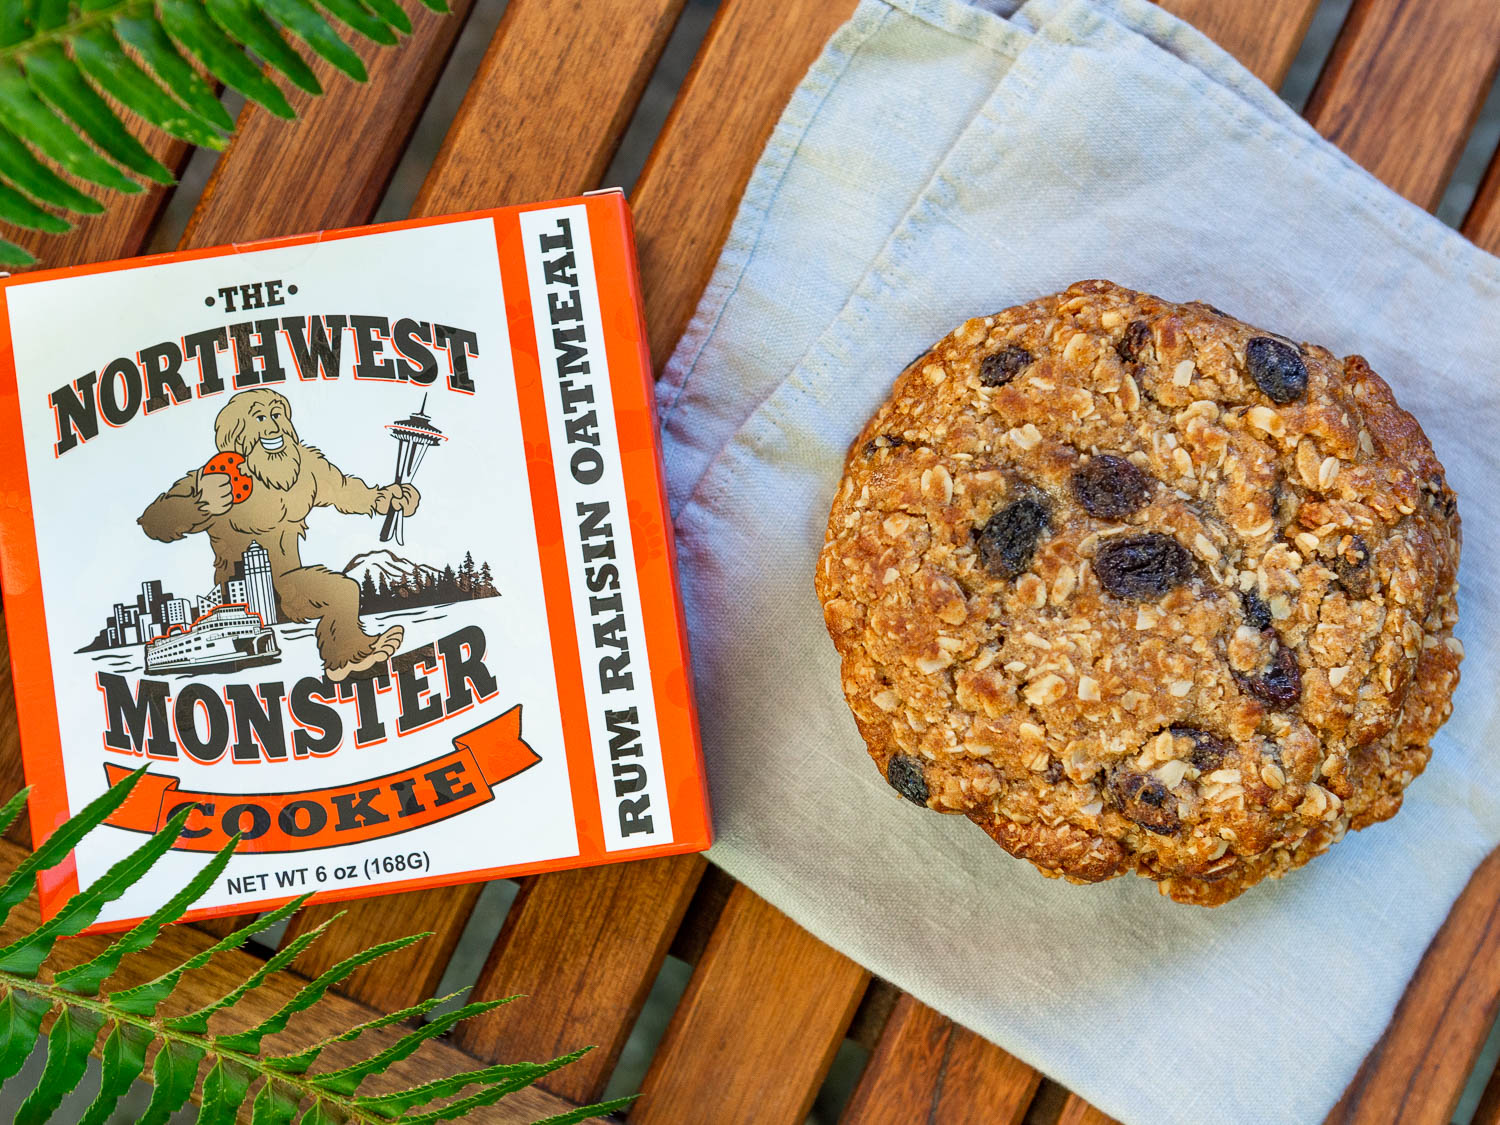  the northwest rum raisin monster cookie setting on a picnic table